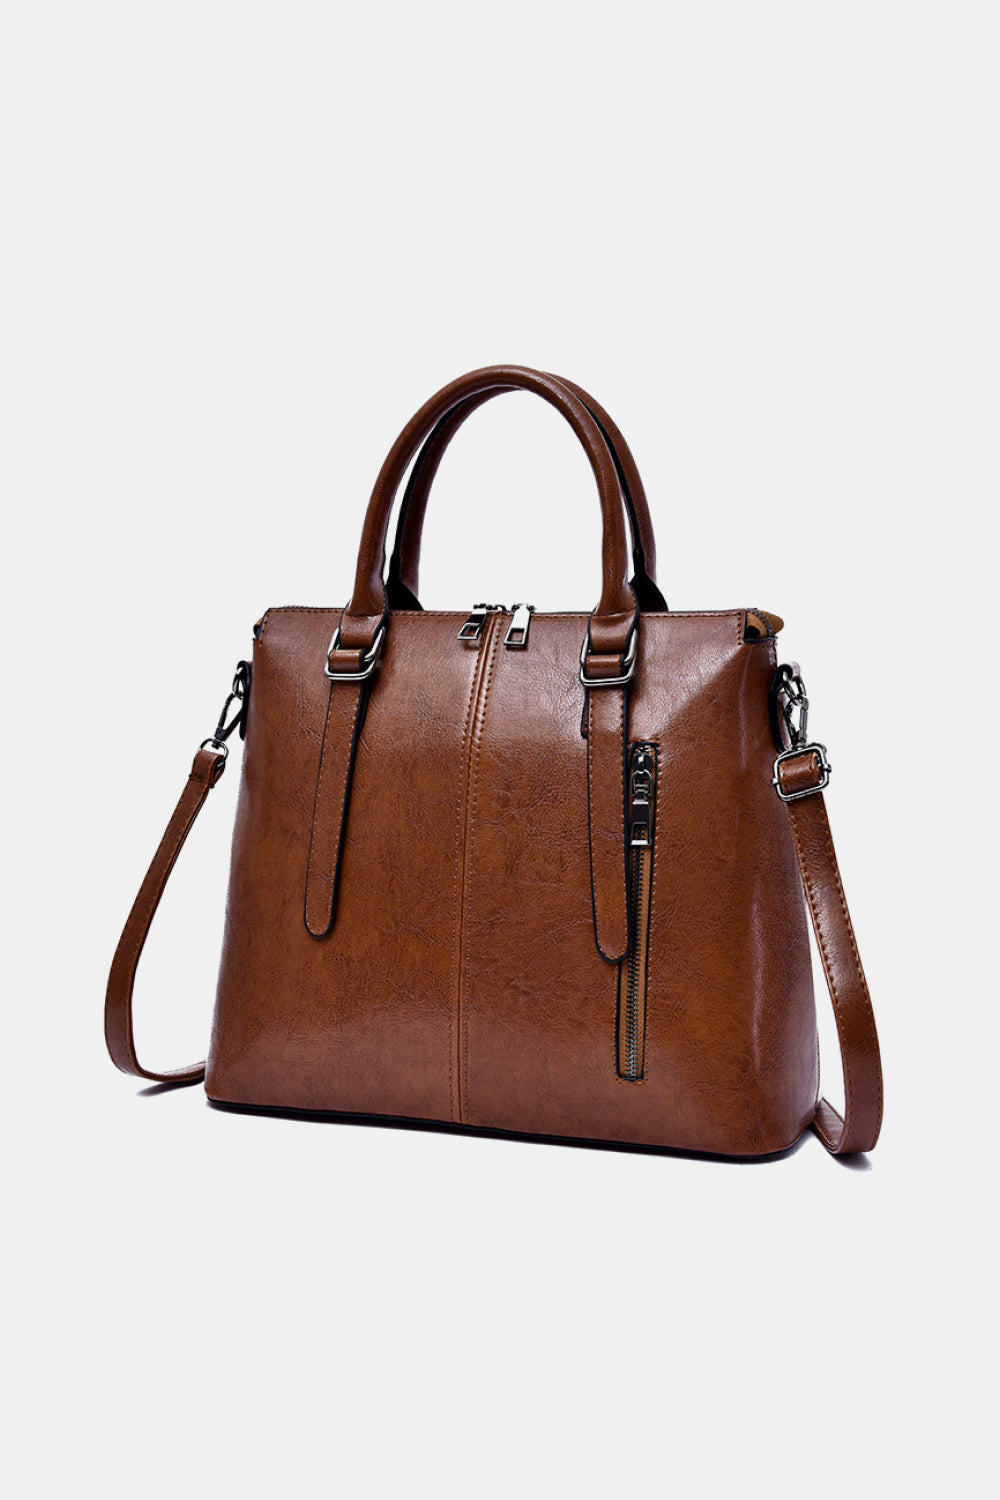 Apothecarry Leather Satchel in Chestnut